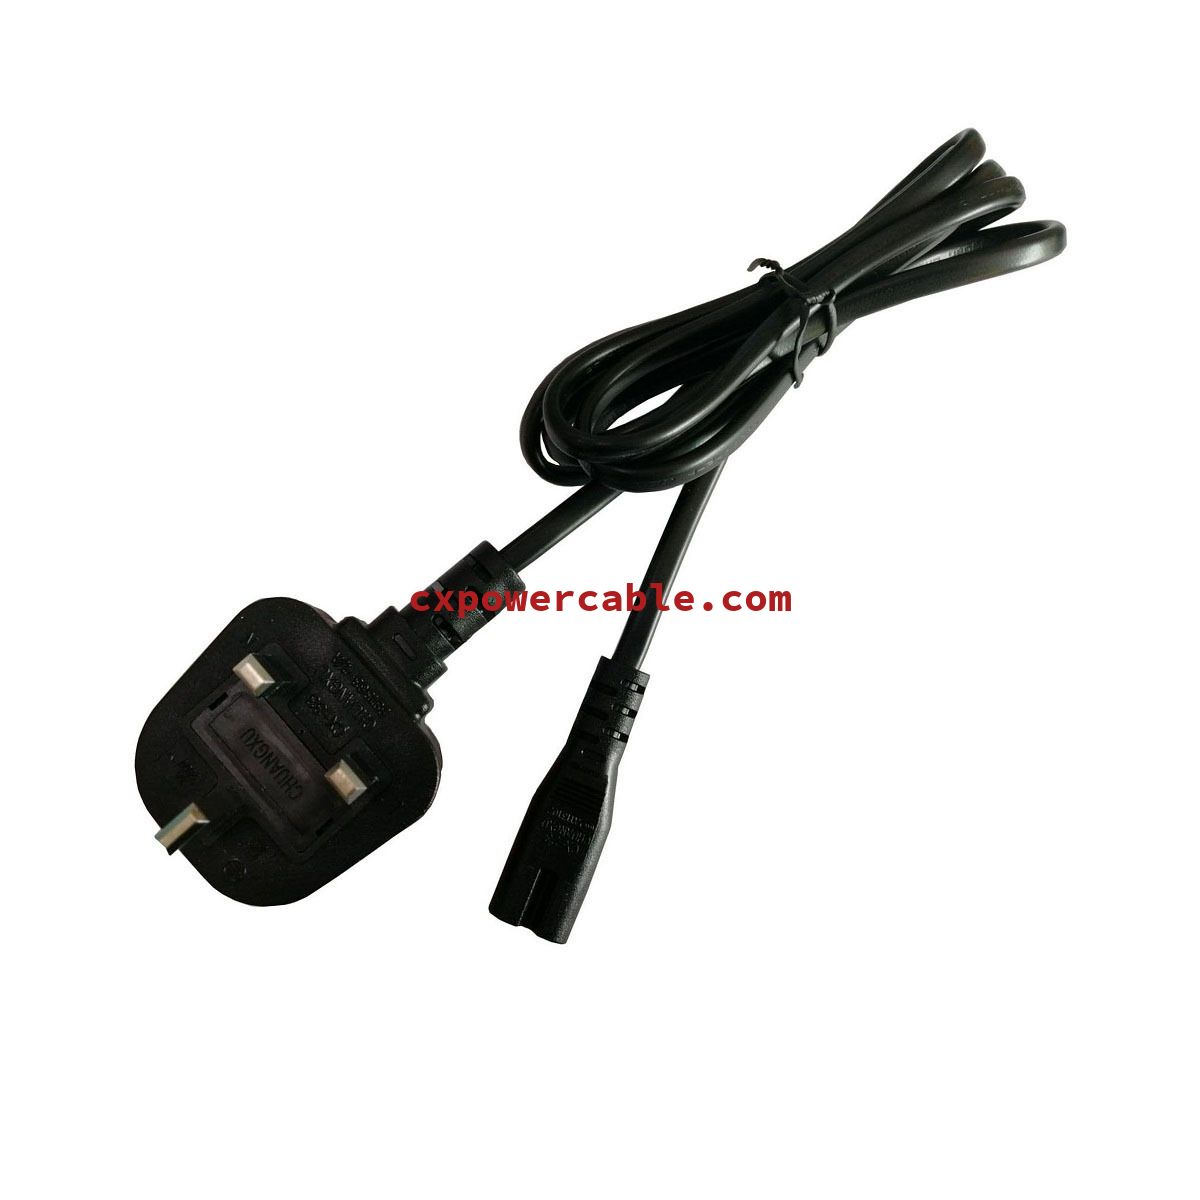 UK style 3pin plug BS certified + 3pin tail plug power cable